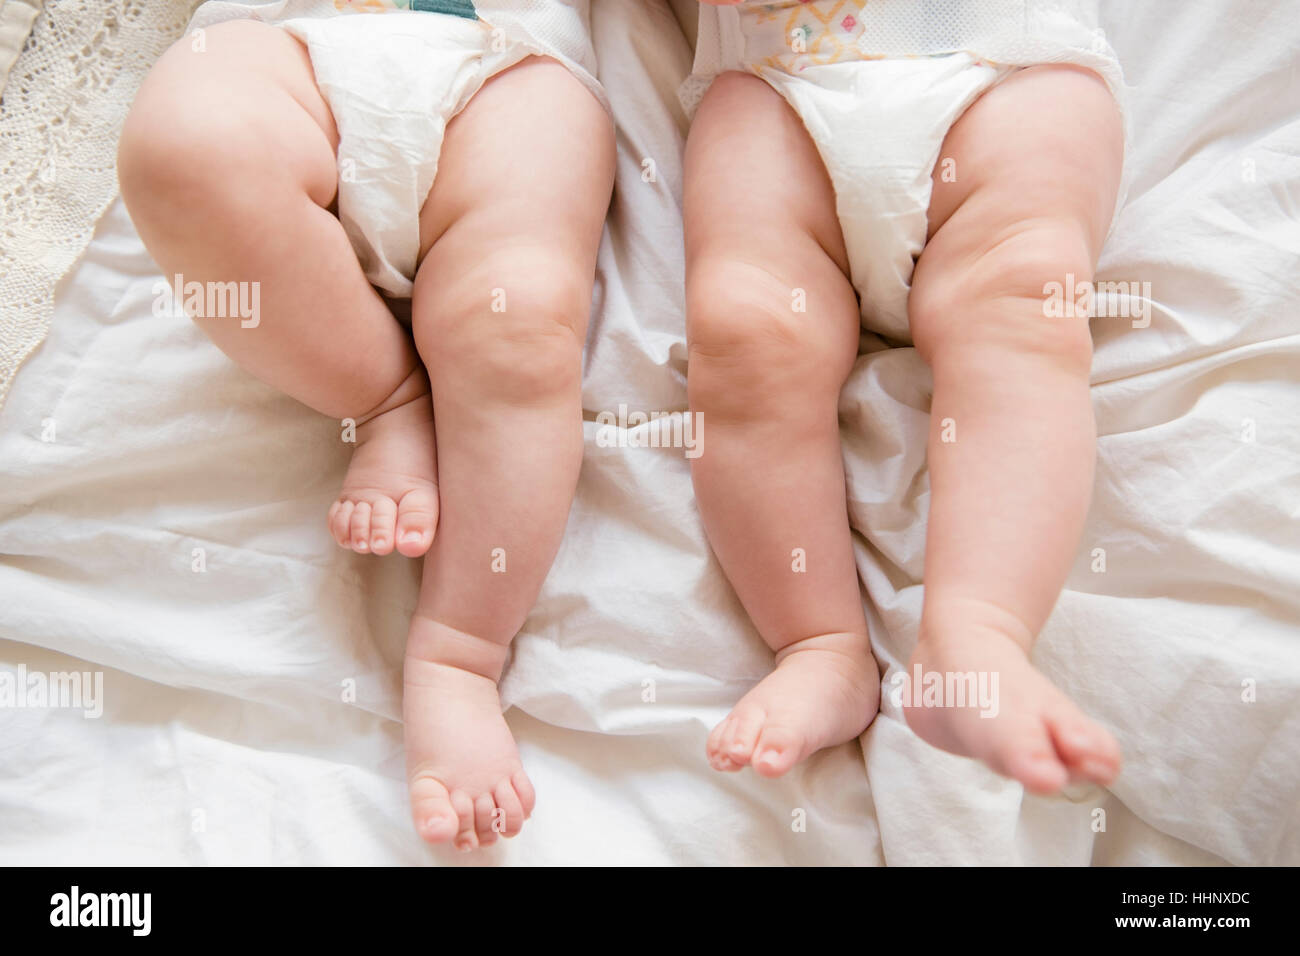 Legs of Caucasian twin baby girls laying on bed Stock Photo